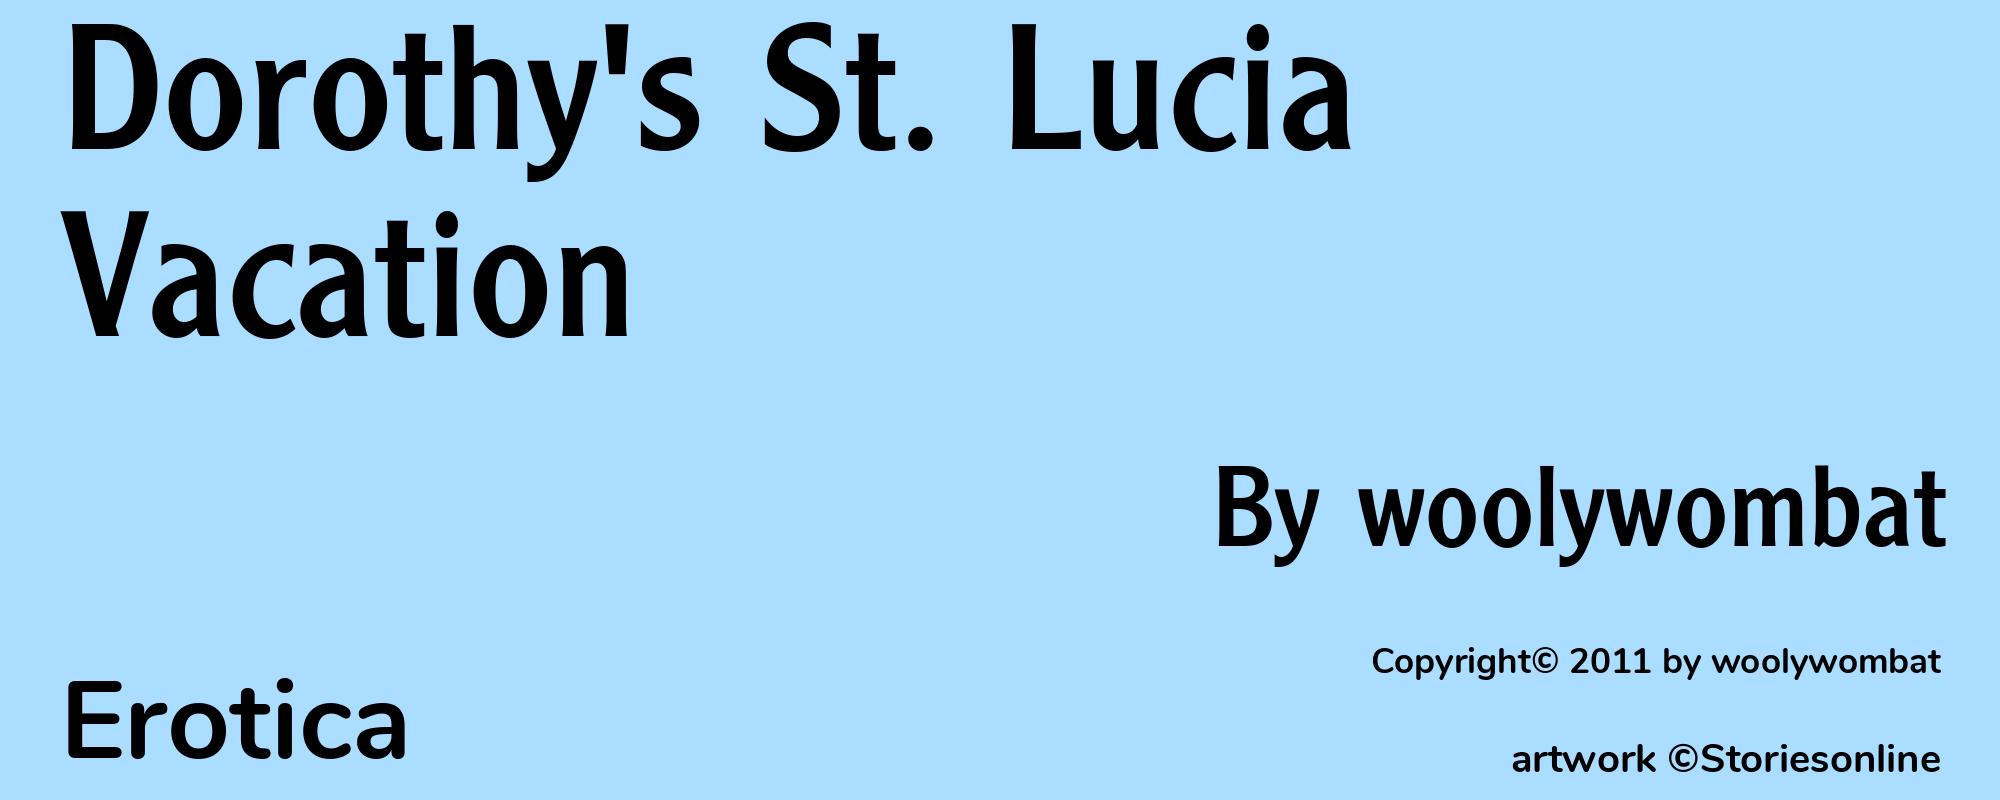 Dorothy's St. Lucia Vacation - Cover